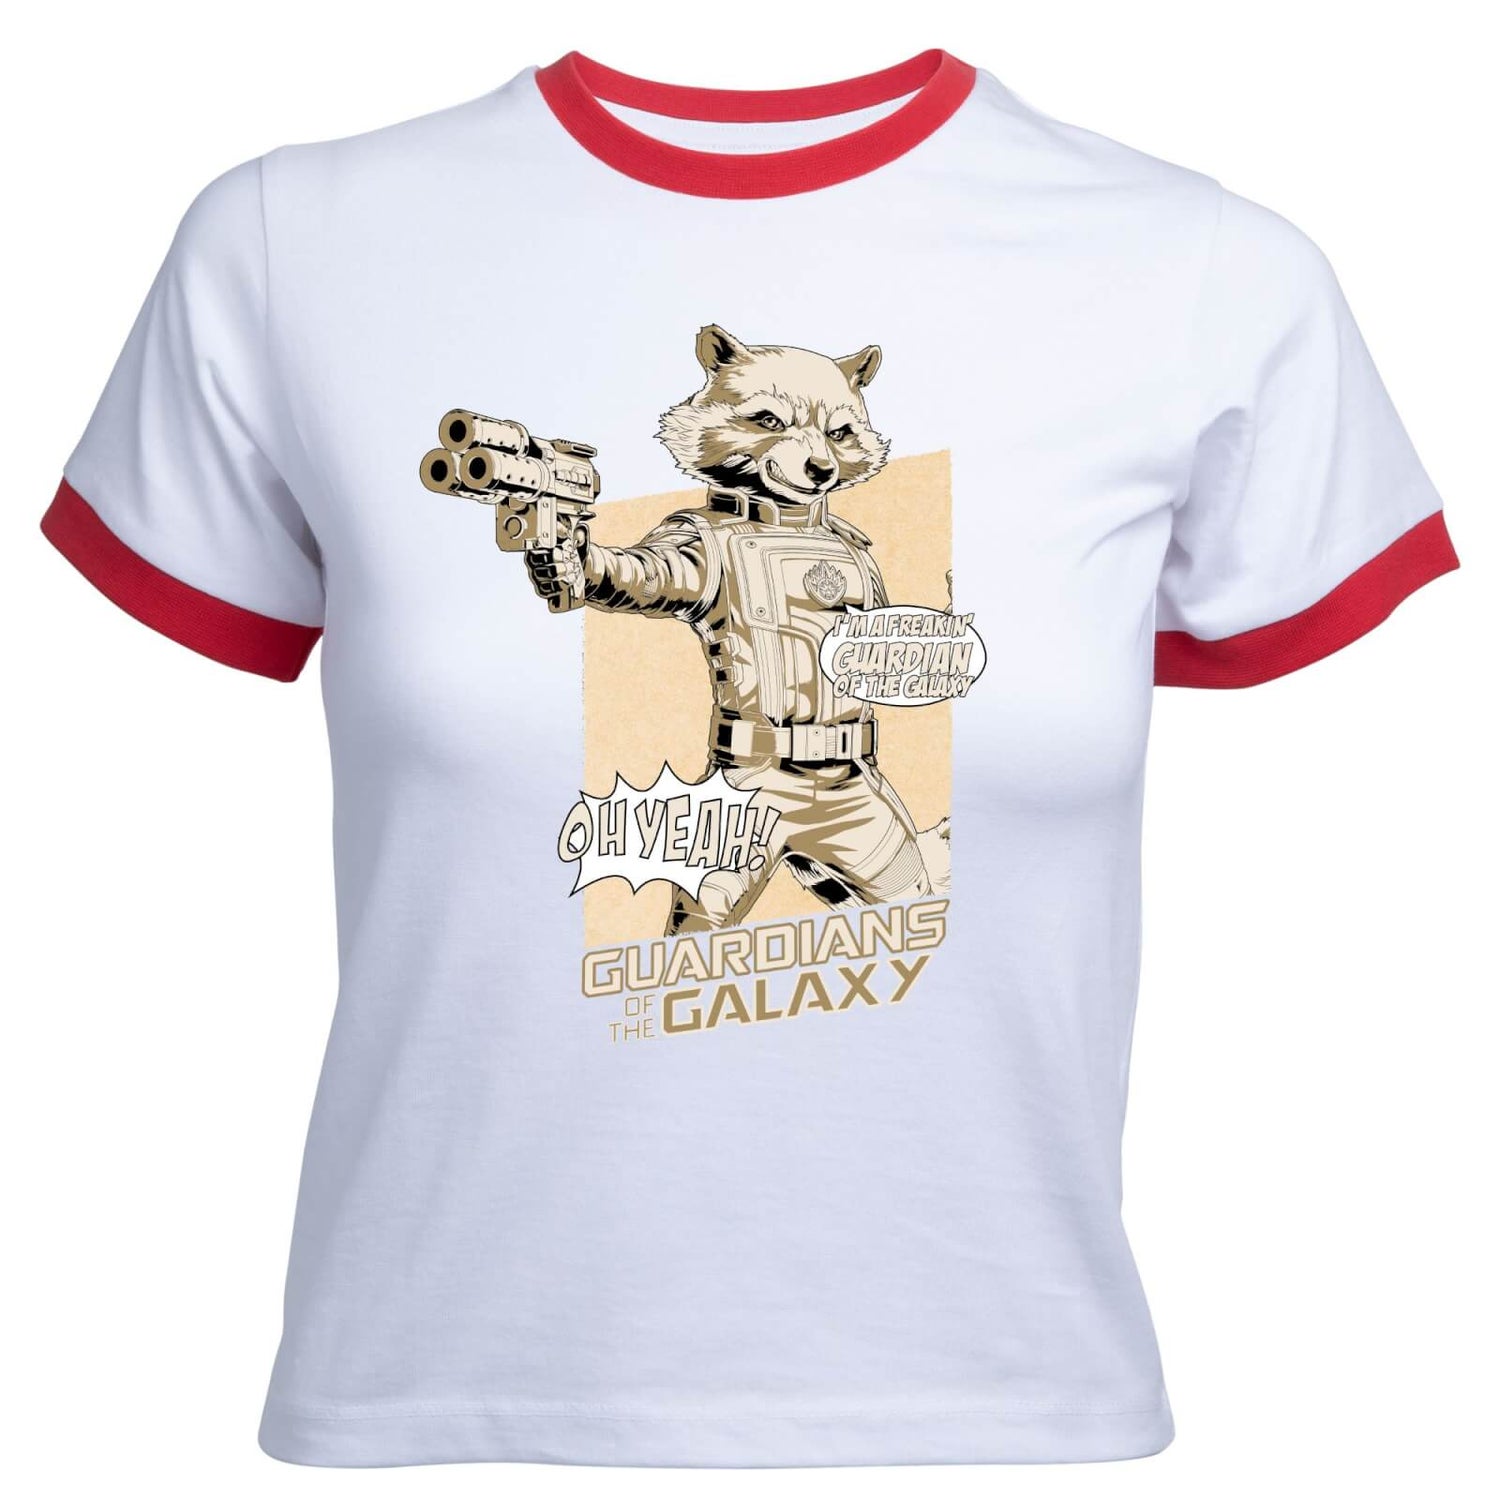 Guardians of the Galaxy Rocket Raccoon Oh Yeah! Women's Cropped Ringer T-Shirt - White Red